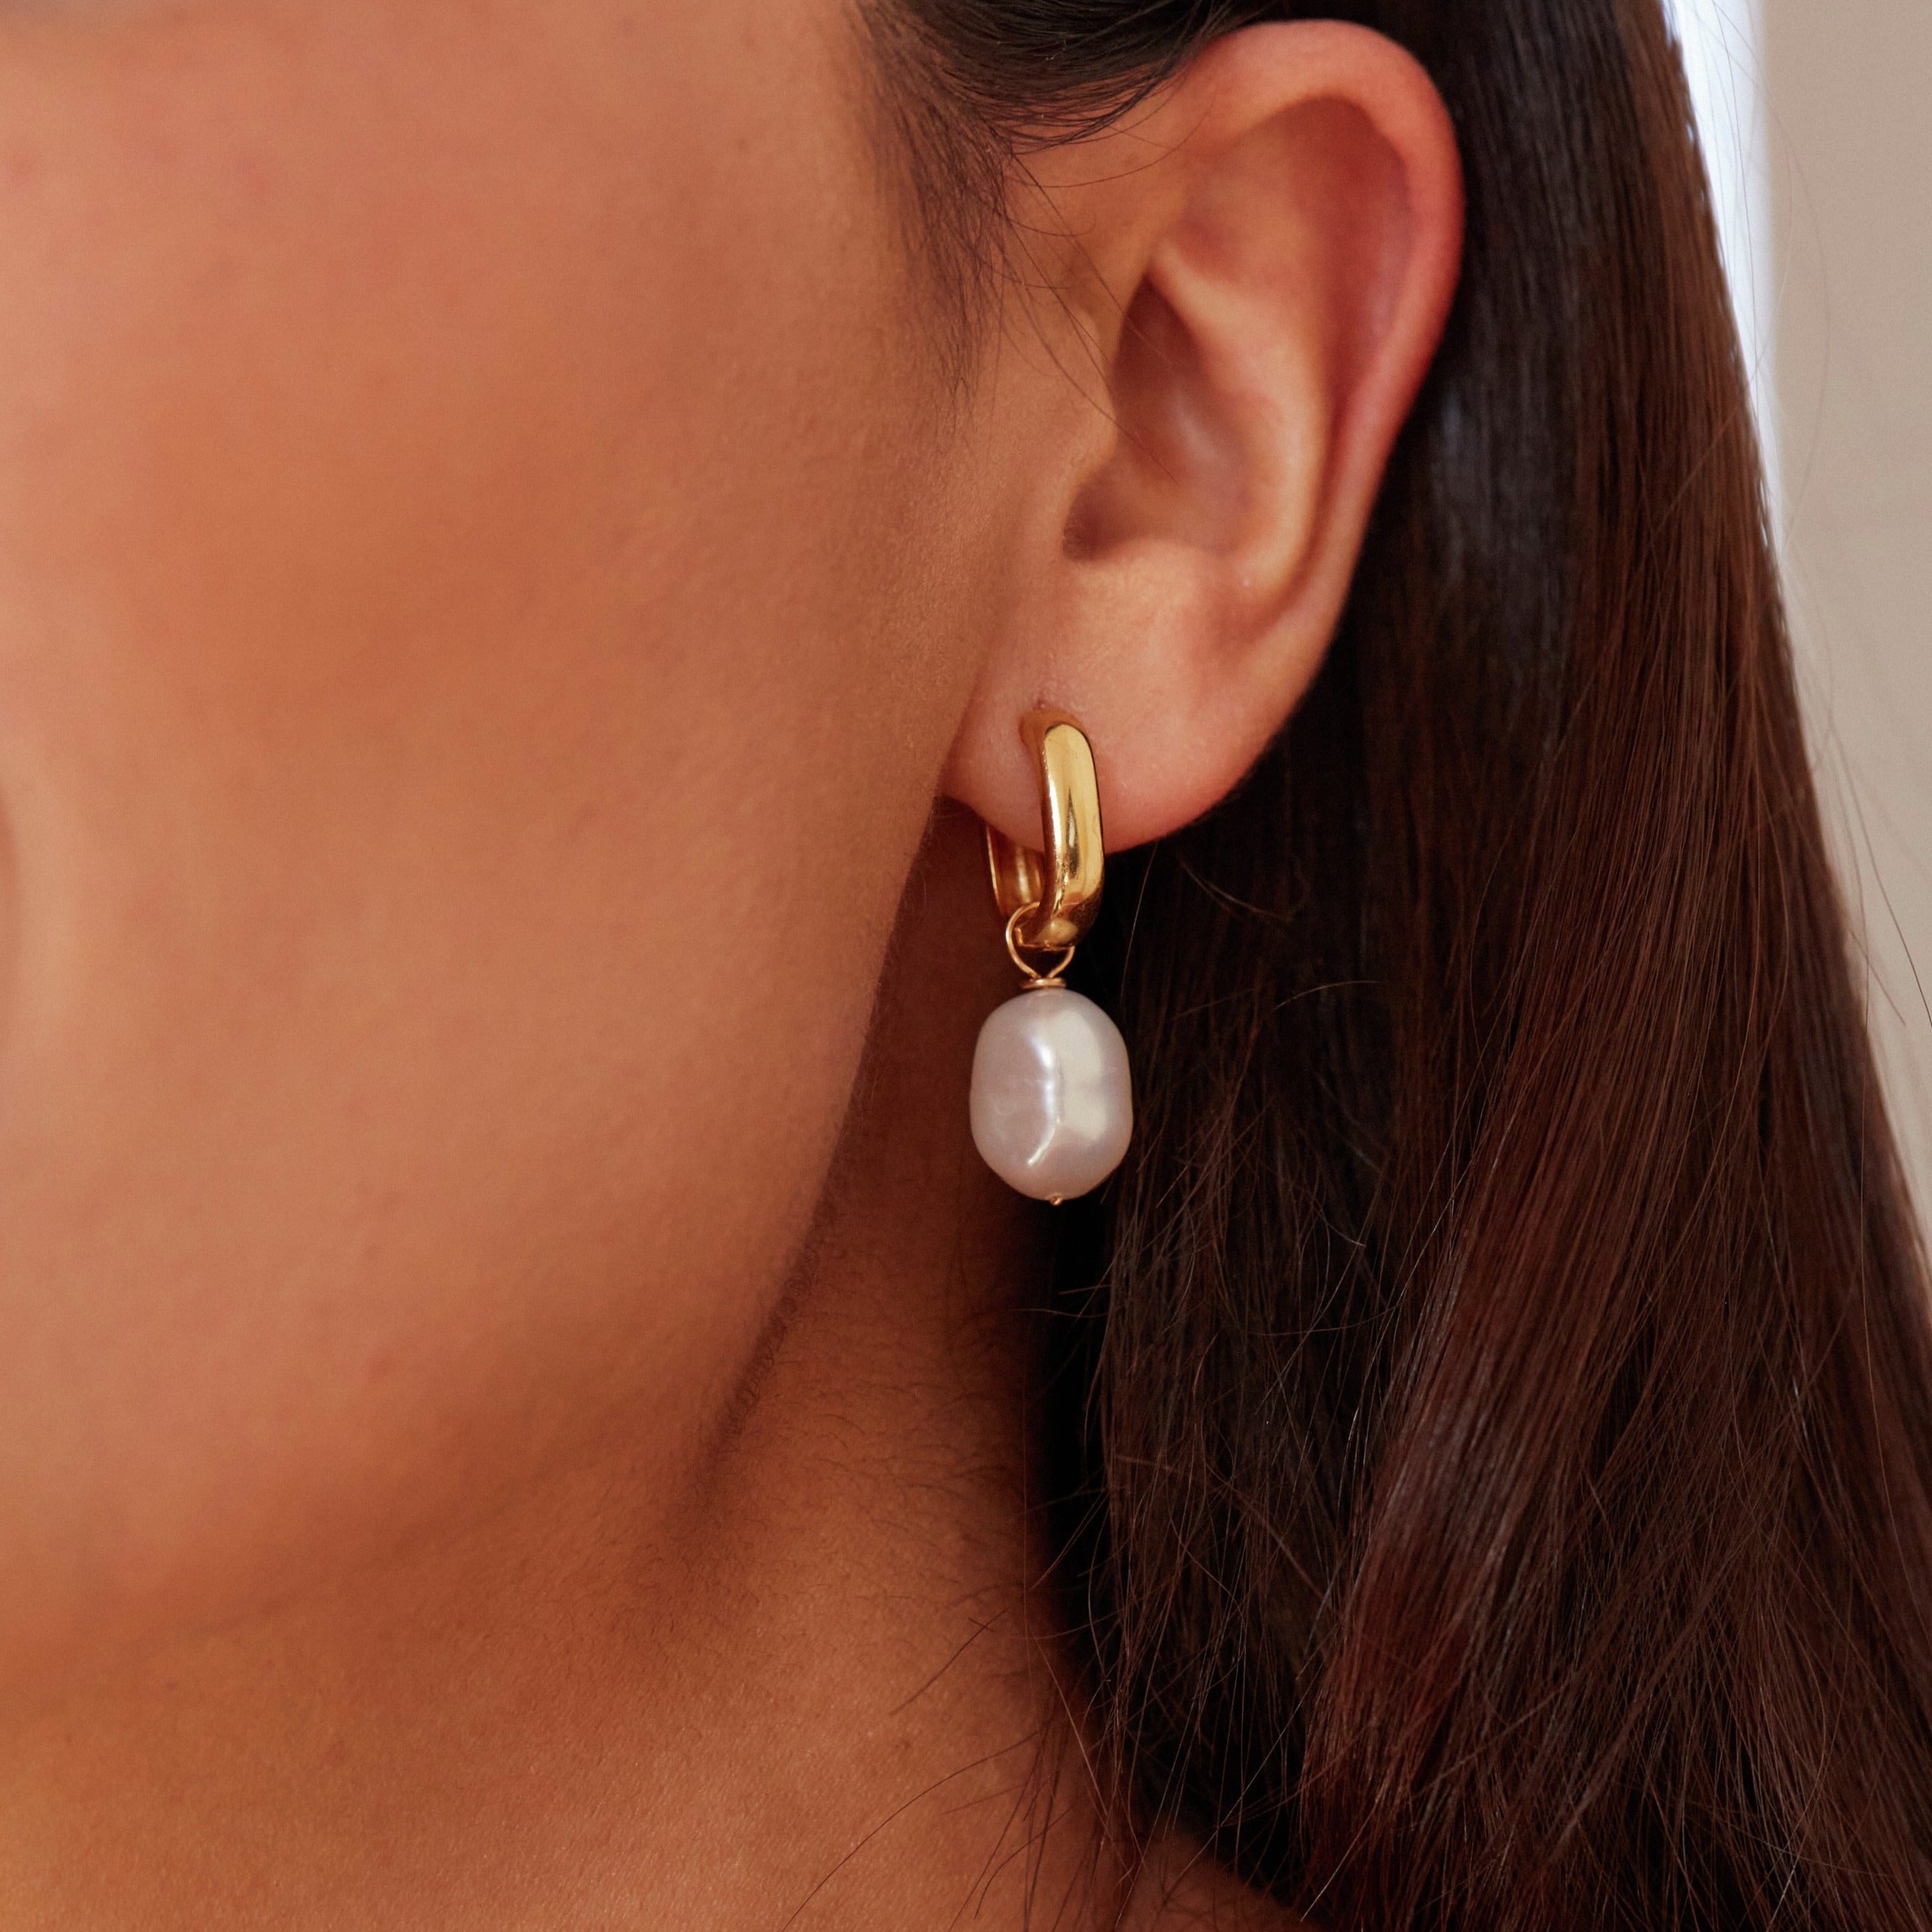 Gold thick squared hoop pearl drop earring in one ear lobe of a brunette woman